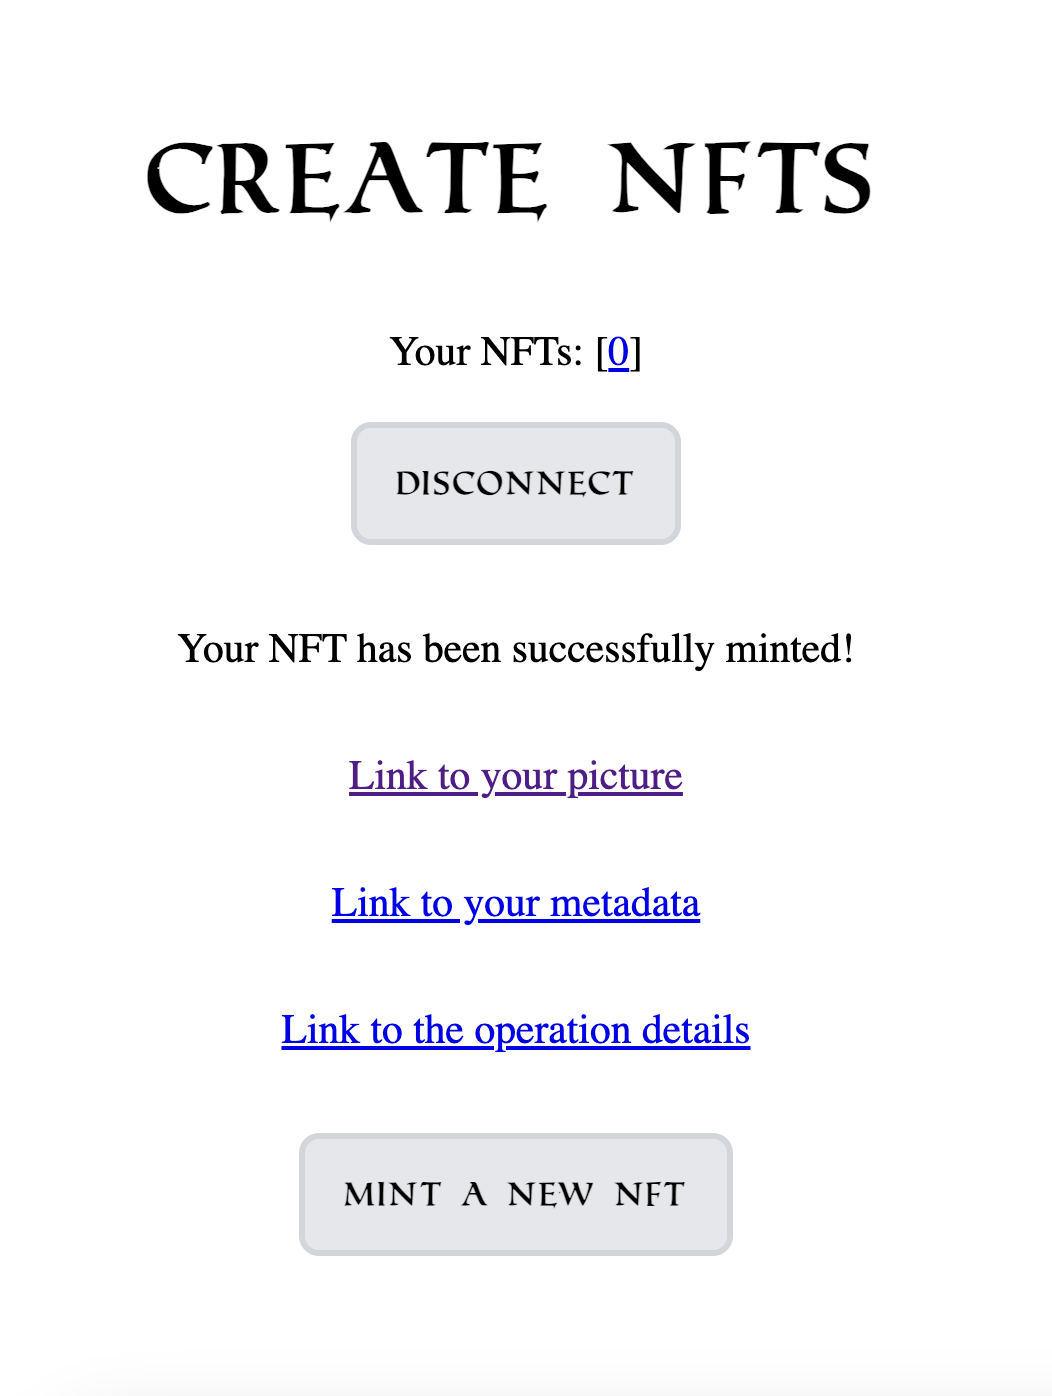 The success message, with links to the NFT information